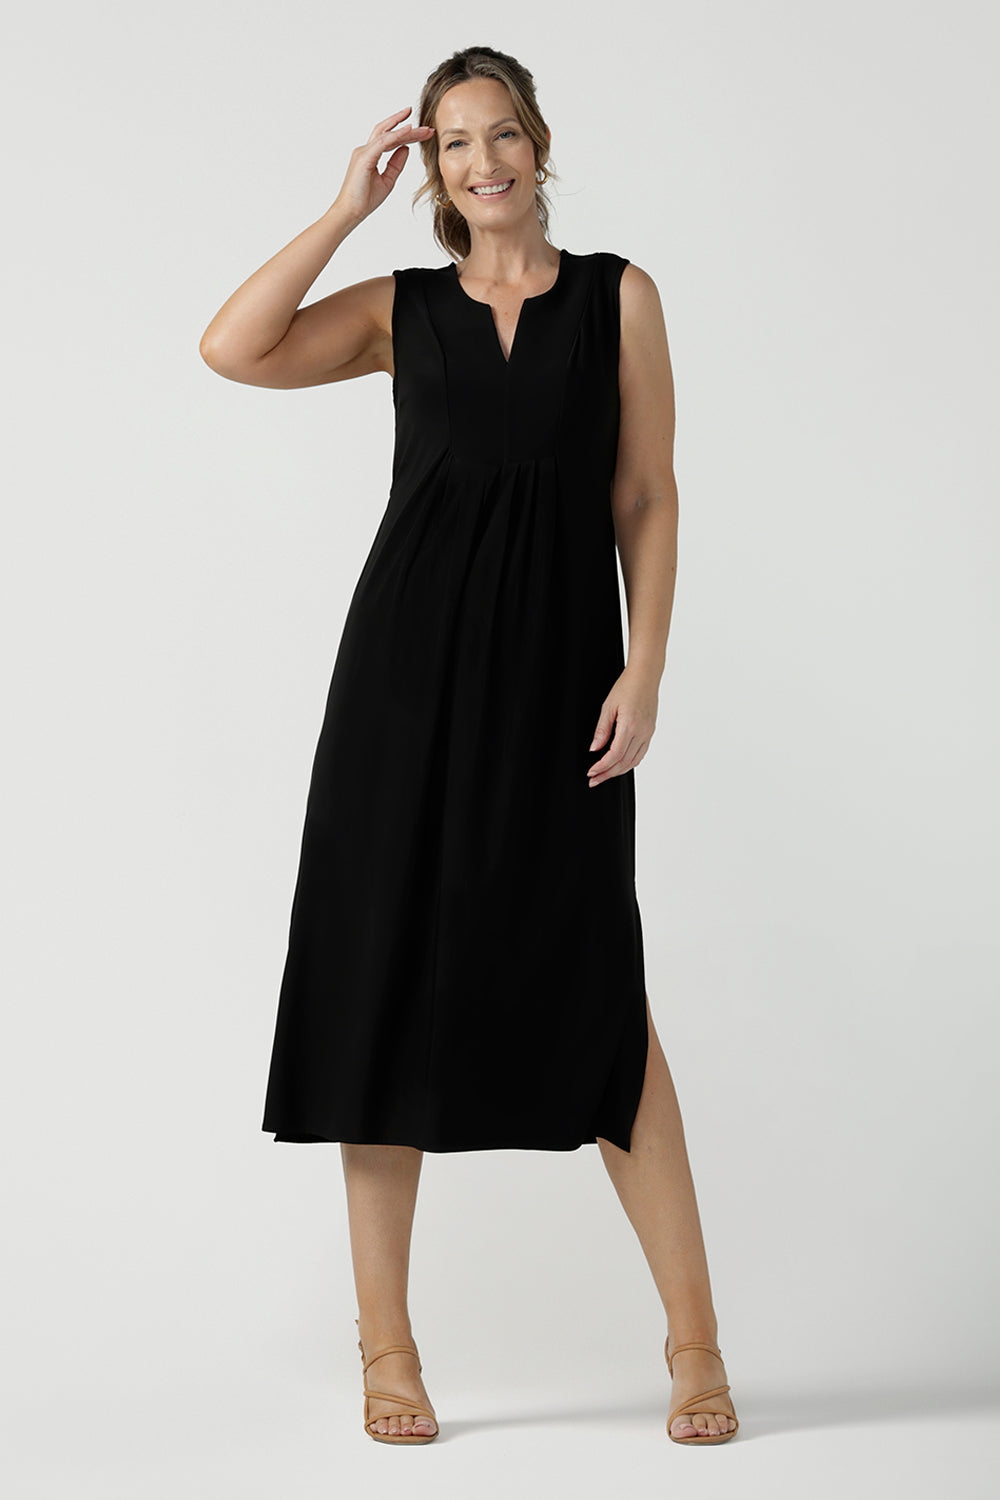 Women's black dress in jersey for women. Pictured on a size 8 for petite to plus size women 8-24. Made in Australia in soft black jersey featuring a v-neckline and pleated front. 